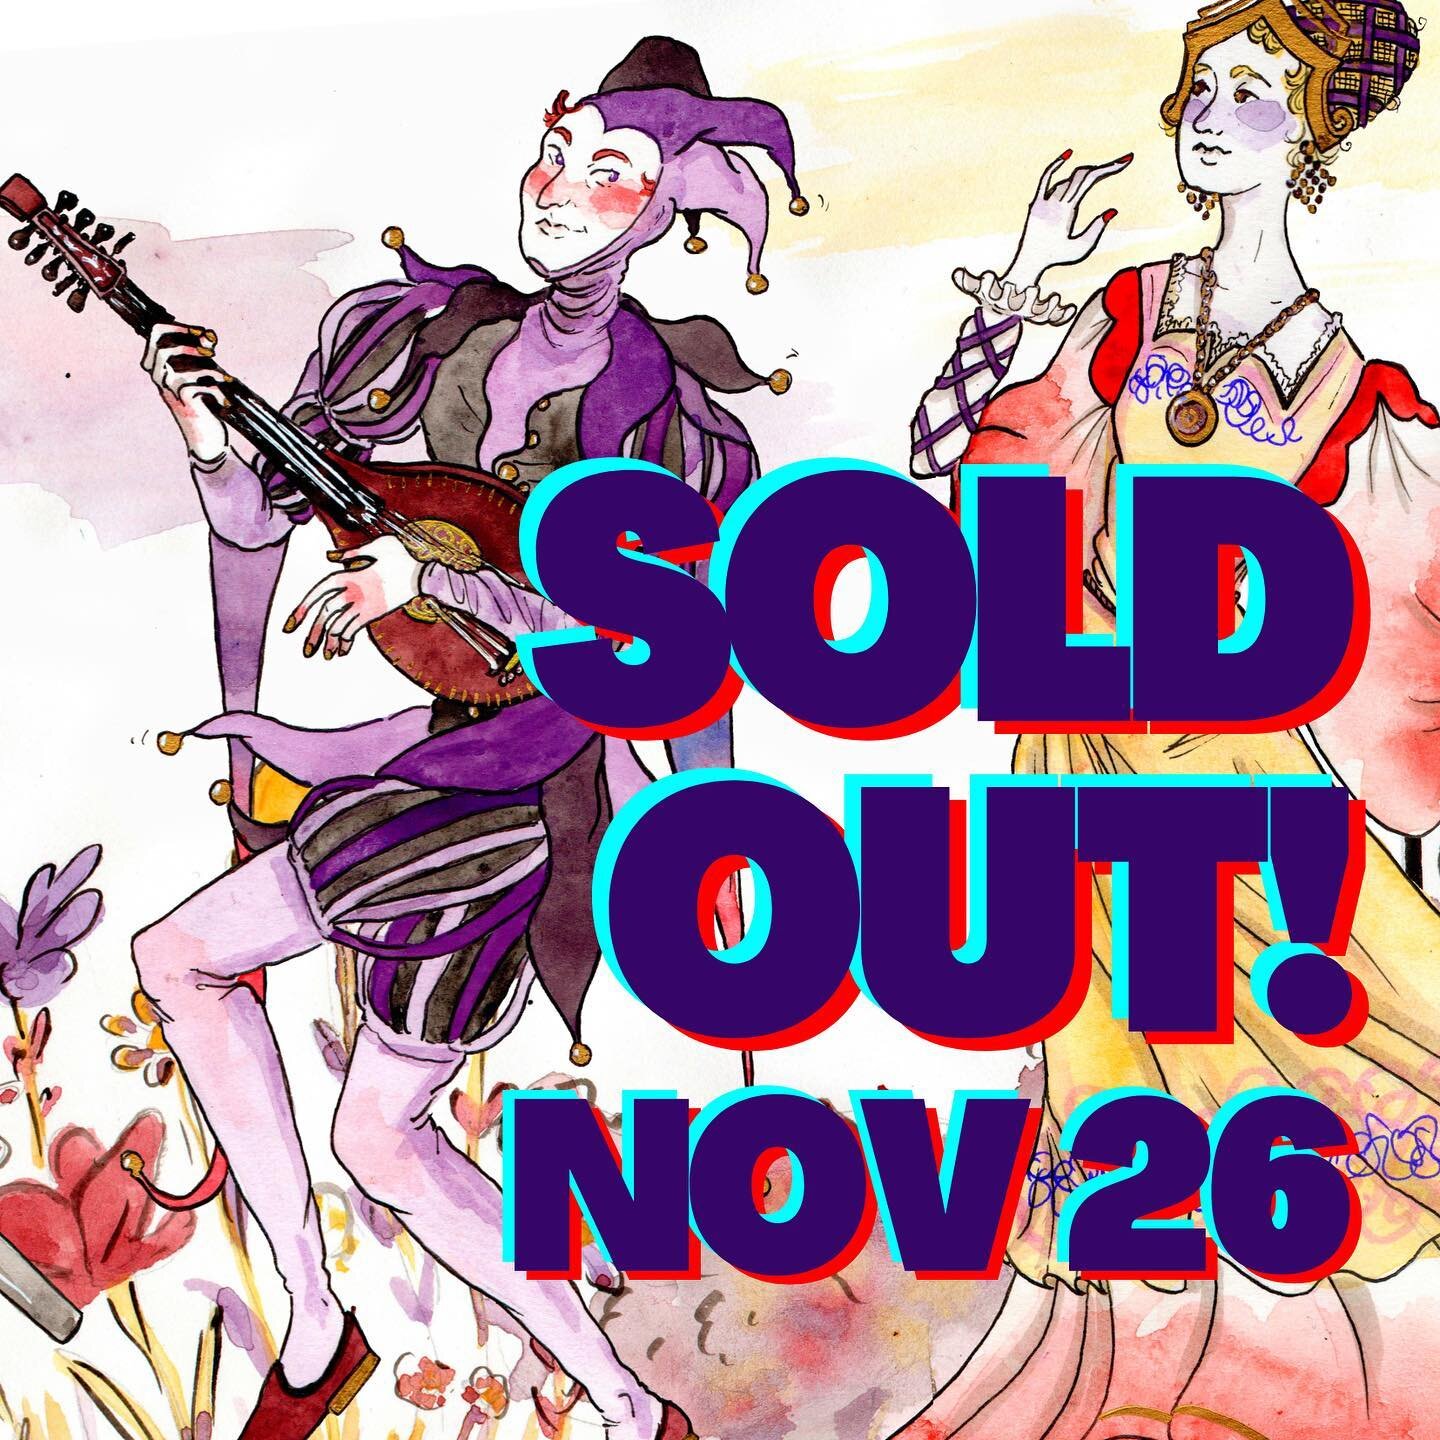 And that&rsquo;s it -We are officially sold out for our closing night!

We are so excited by the enthusiasm for this amazing production and can&rsquo;t wait to see you all at closing night tonight! 

#opera #operaperformance #yvrarts #moberlyartscent